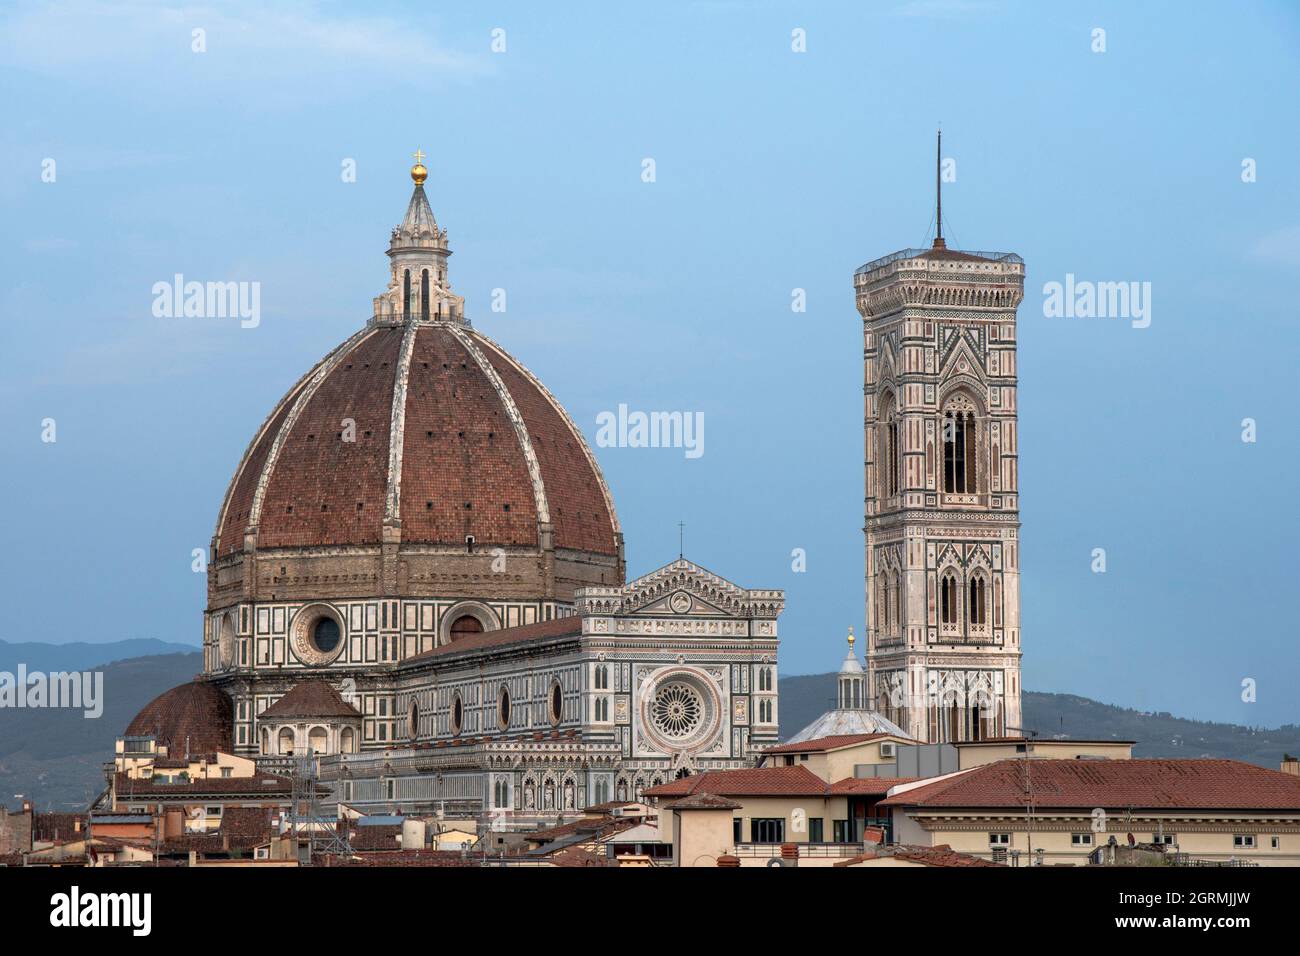 View of the Duomo and Giotto's bell tower from the rooftops of Florence Stock Photo